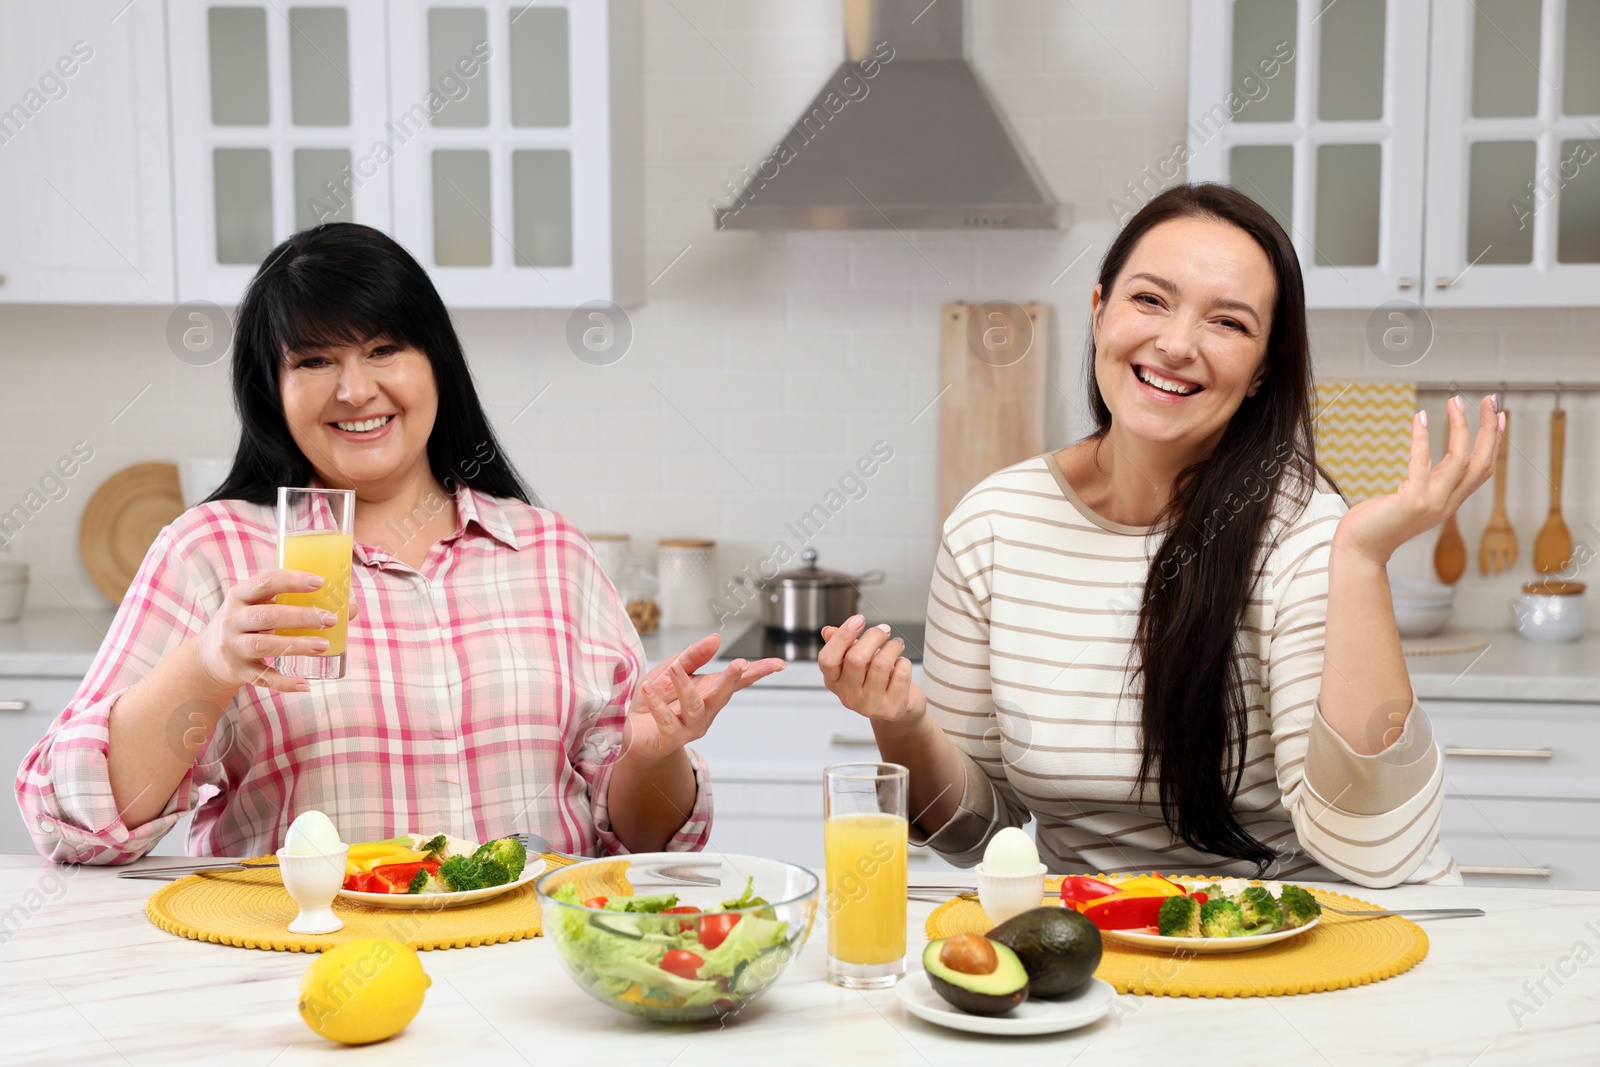 Photo of Happy overweight women having healthy meal together at table in kitchen